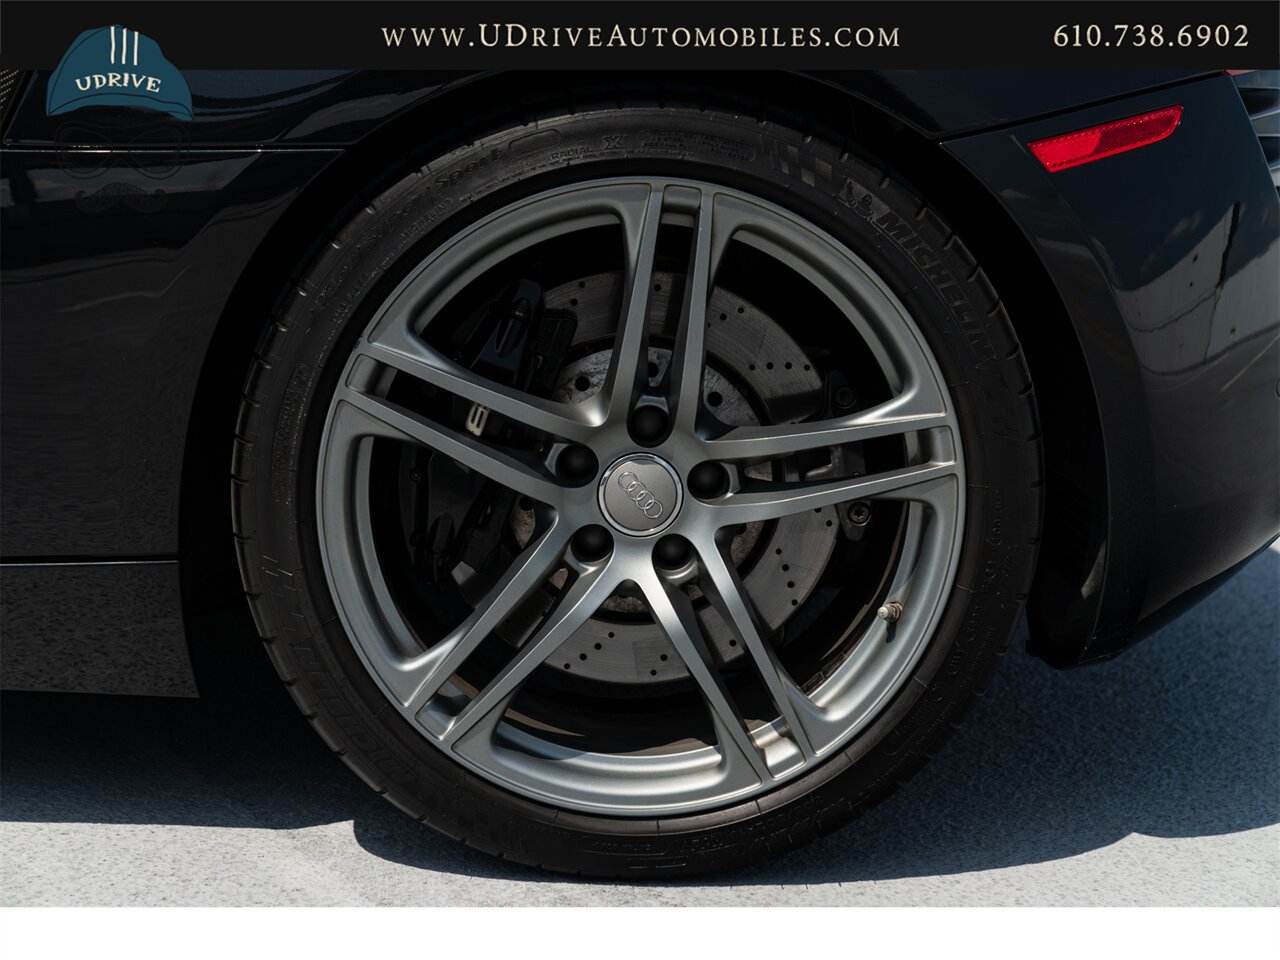 2012 Audi R8 4.2 Quattro  6 Speed Manual 1 Owner Service History - Photo 53 - West Chester, PA 19382